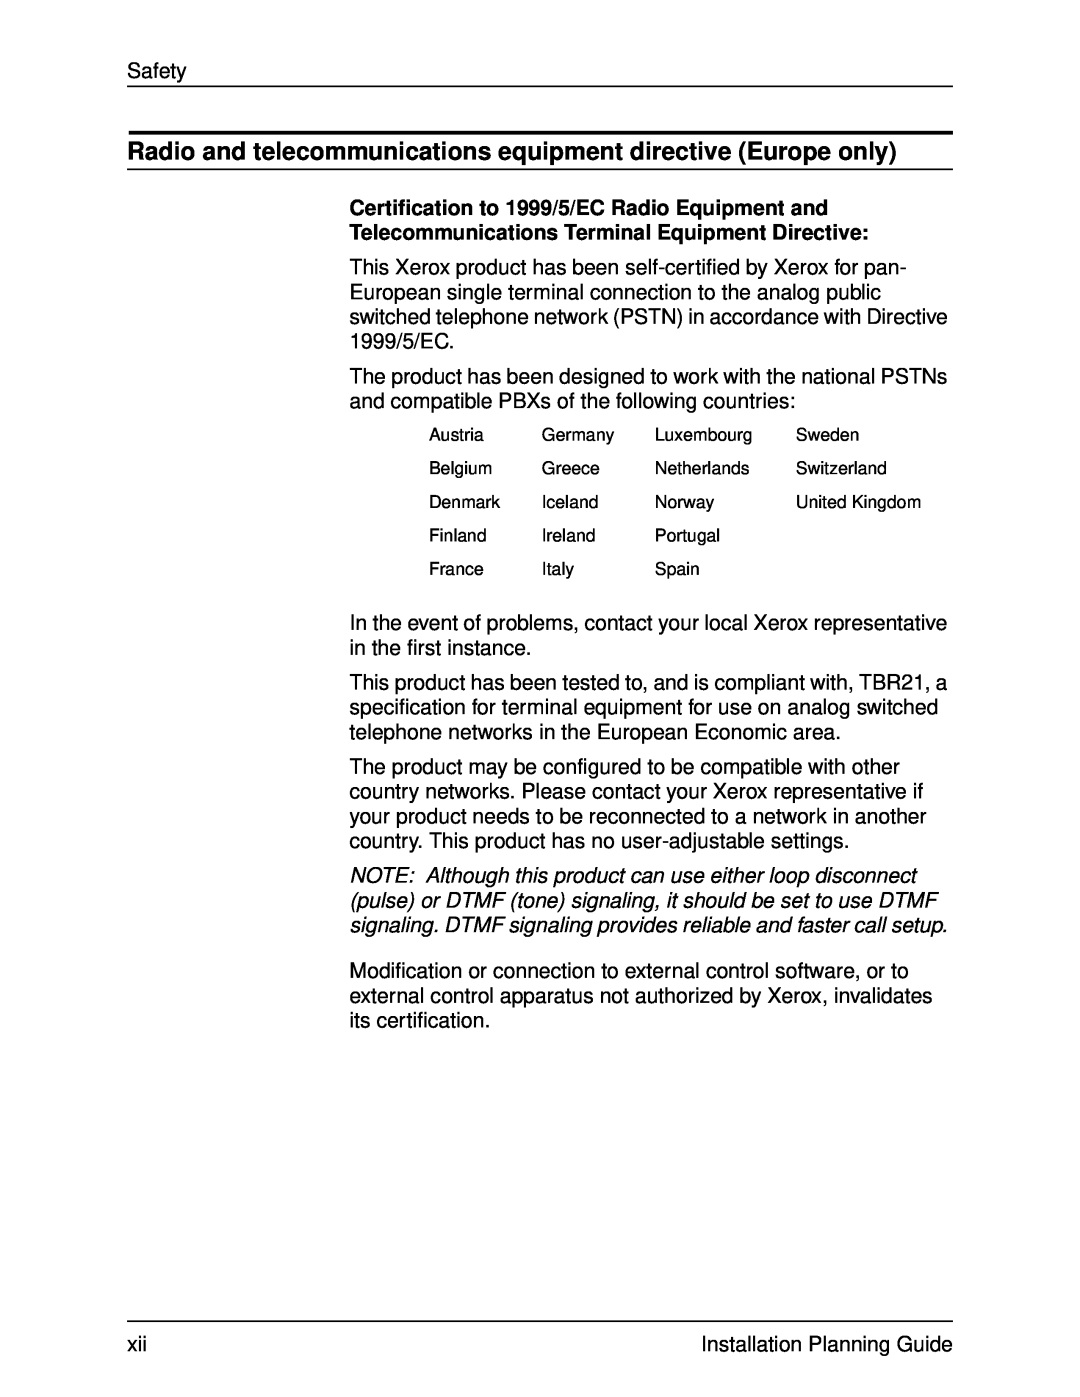 Xerox 100 Radio and telecommunications equipment directive Europe only, Certification to 1999/5/EC Radio Equipment and 